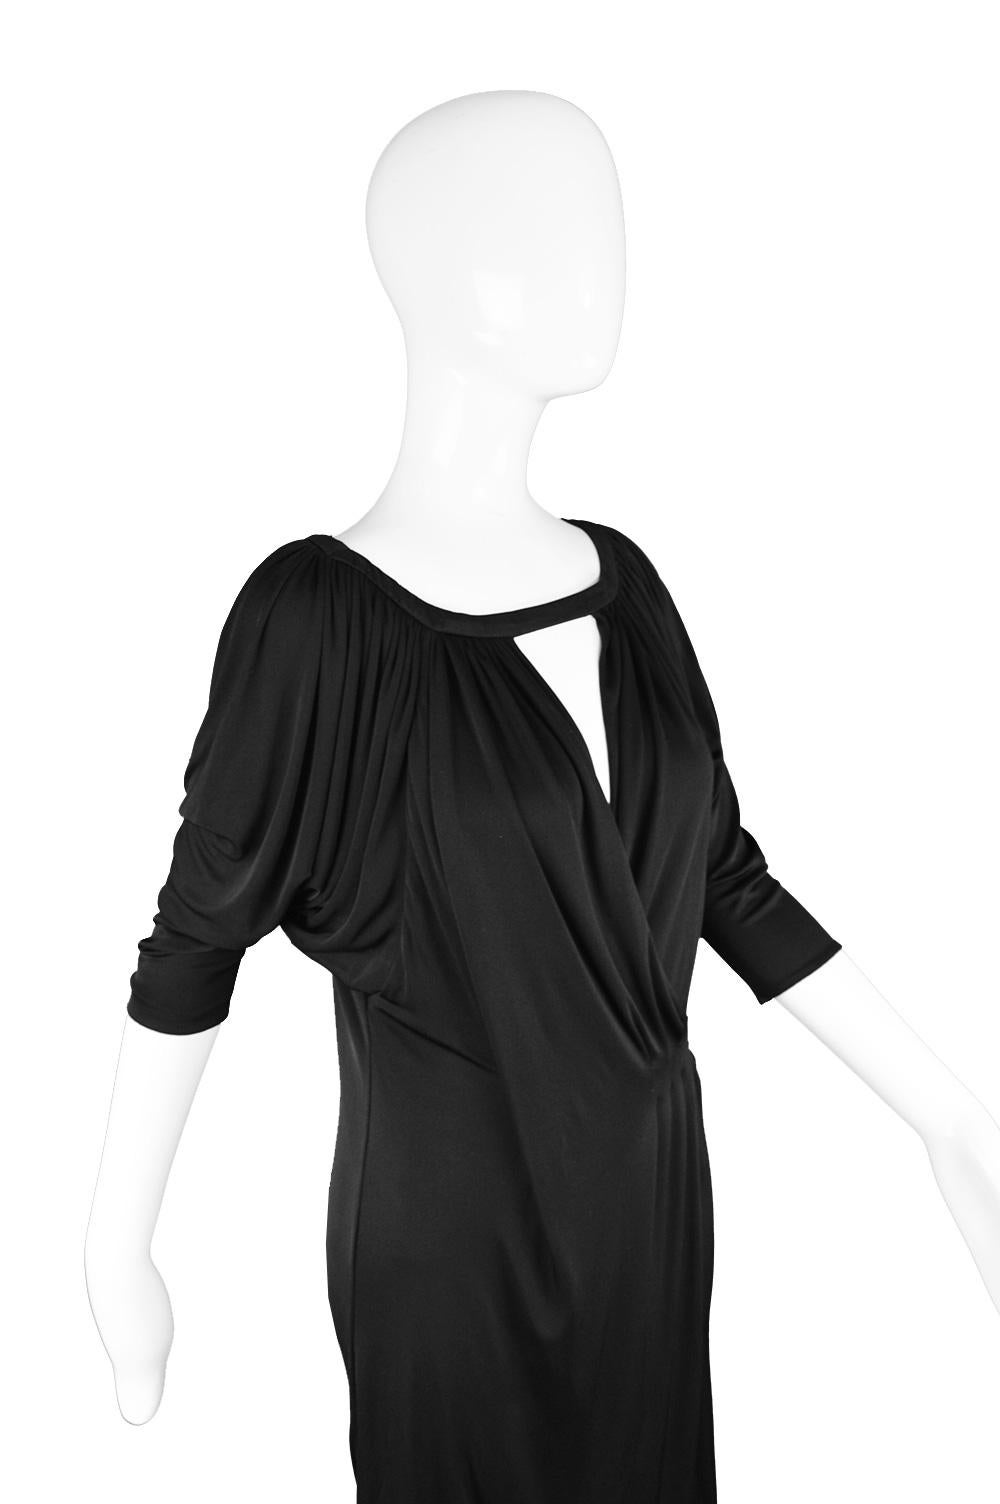 Gianni Versace Couture Black Jersey Batwing Vintage Dress, Spring 2001 For Sale 2